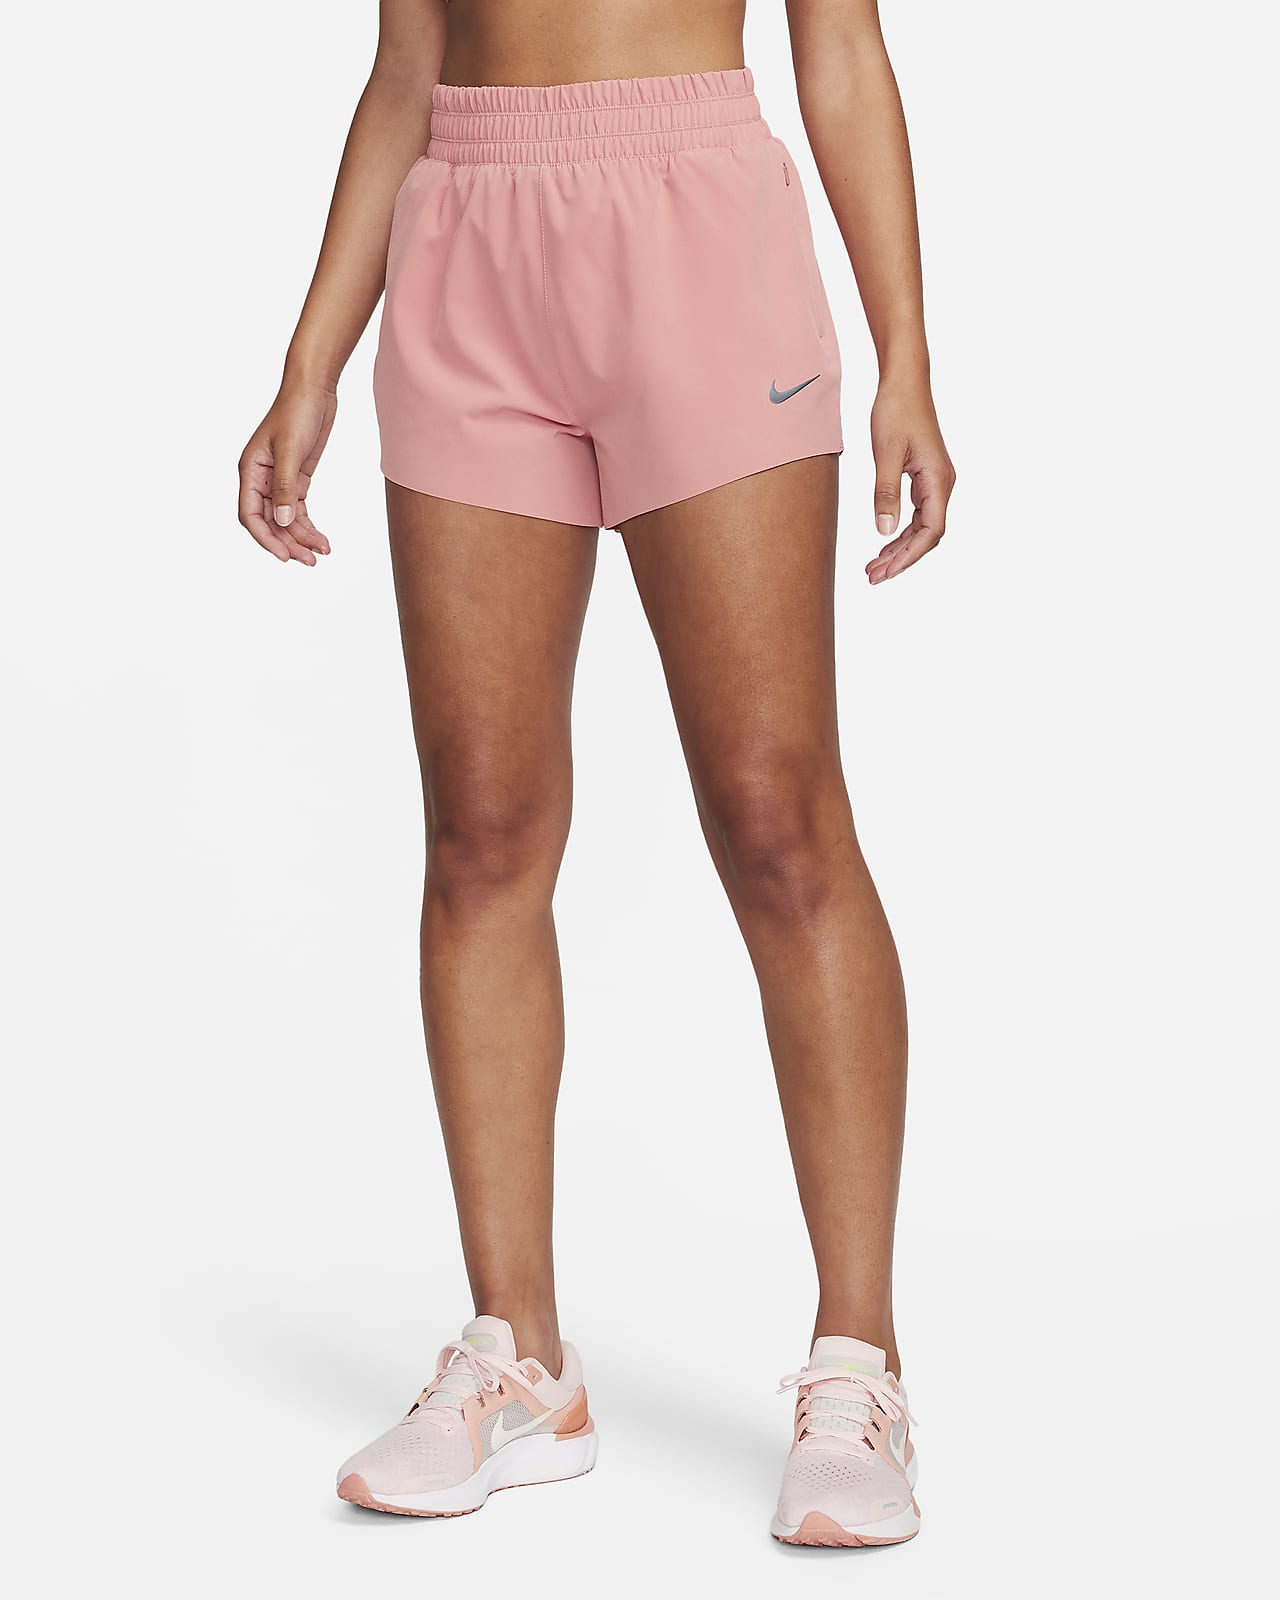 https://static.nike.com/a/images/t_PDP_1280_v1/f_auto,q_auto:eco/c7551480-5f0e-4fe6-9805-a9579f98bce6/dri-fit-running-division-high-waisted-7-5cm-brief-lined-running-shorts-with-pockets-QHVLfb.png